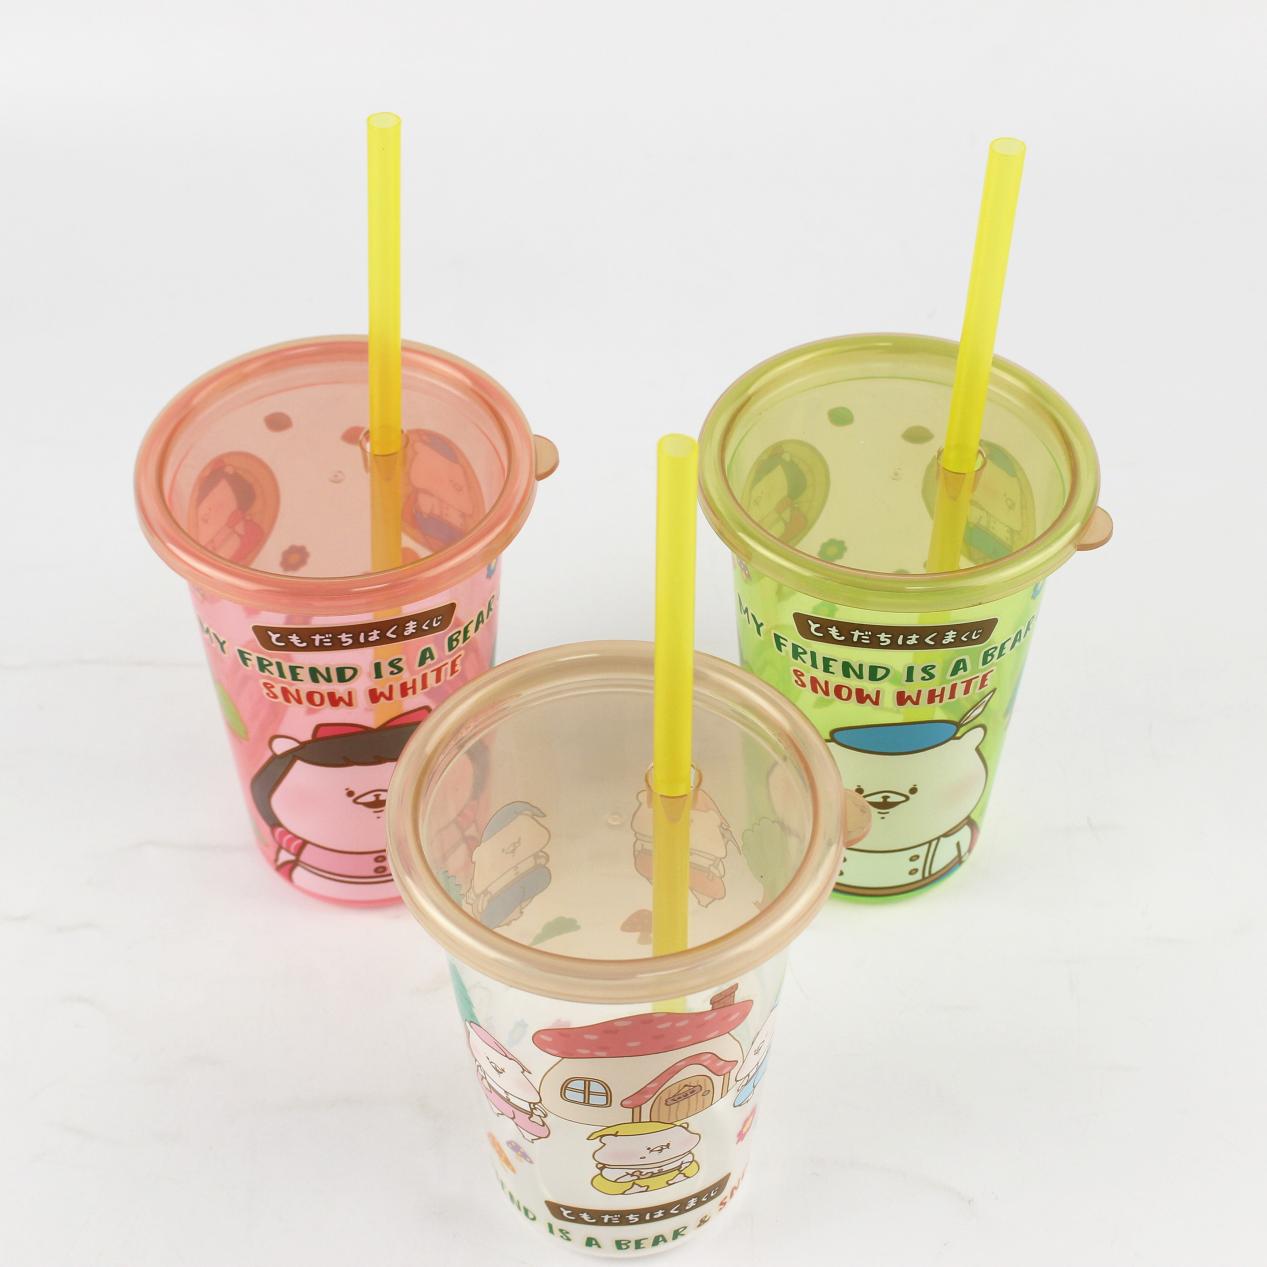 New Product-Children's Straw Cup!